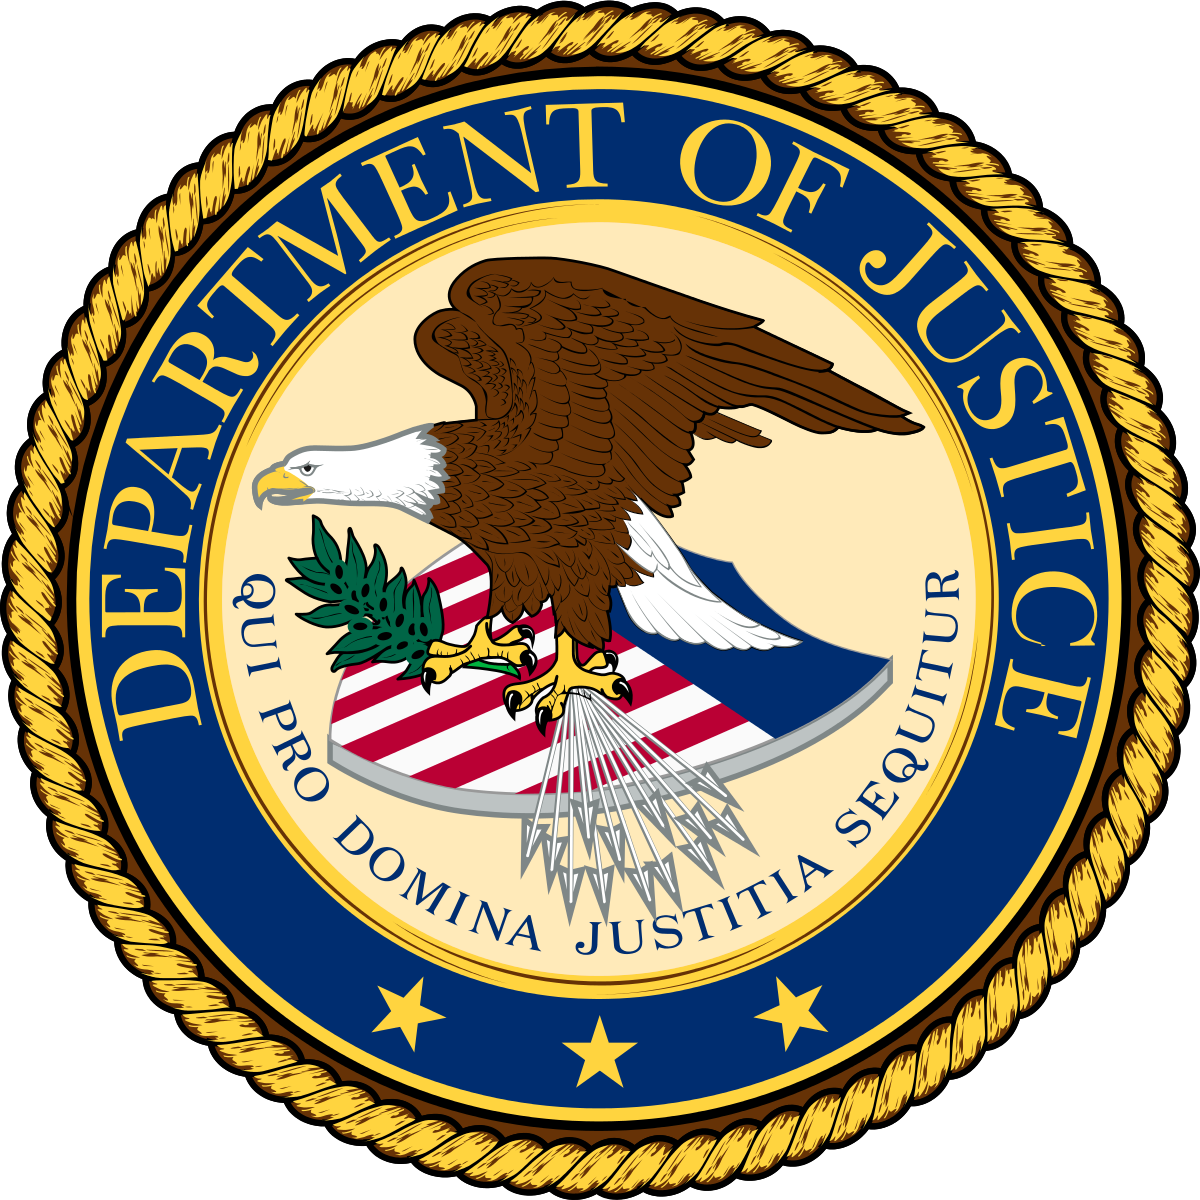 DOJ says key part of Civil Rights Act does not protect sexual orientation